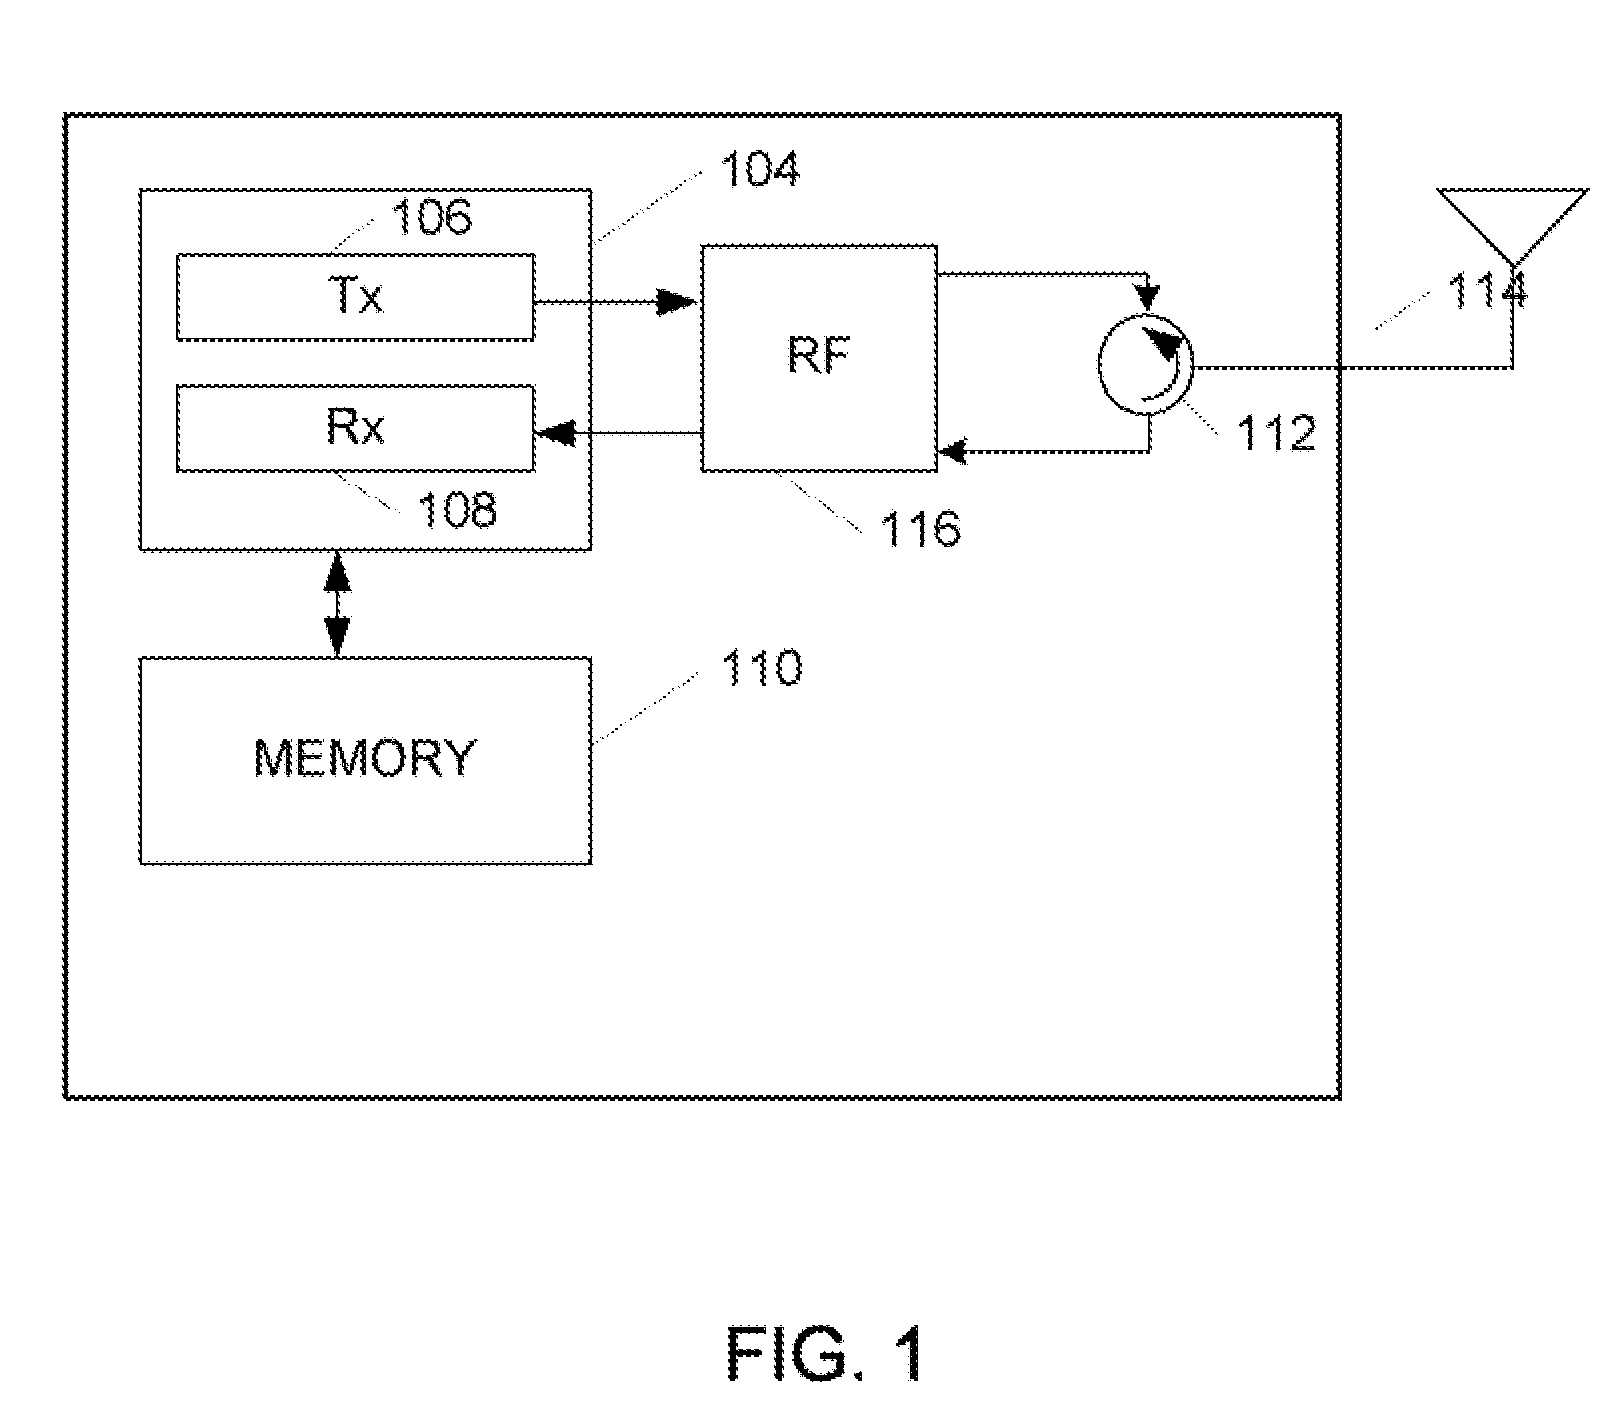 Systems and methods for collision avoidance in a multiple RFID interrogator environment